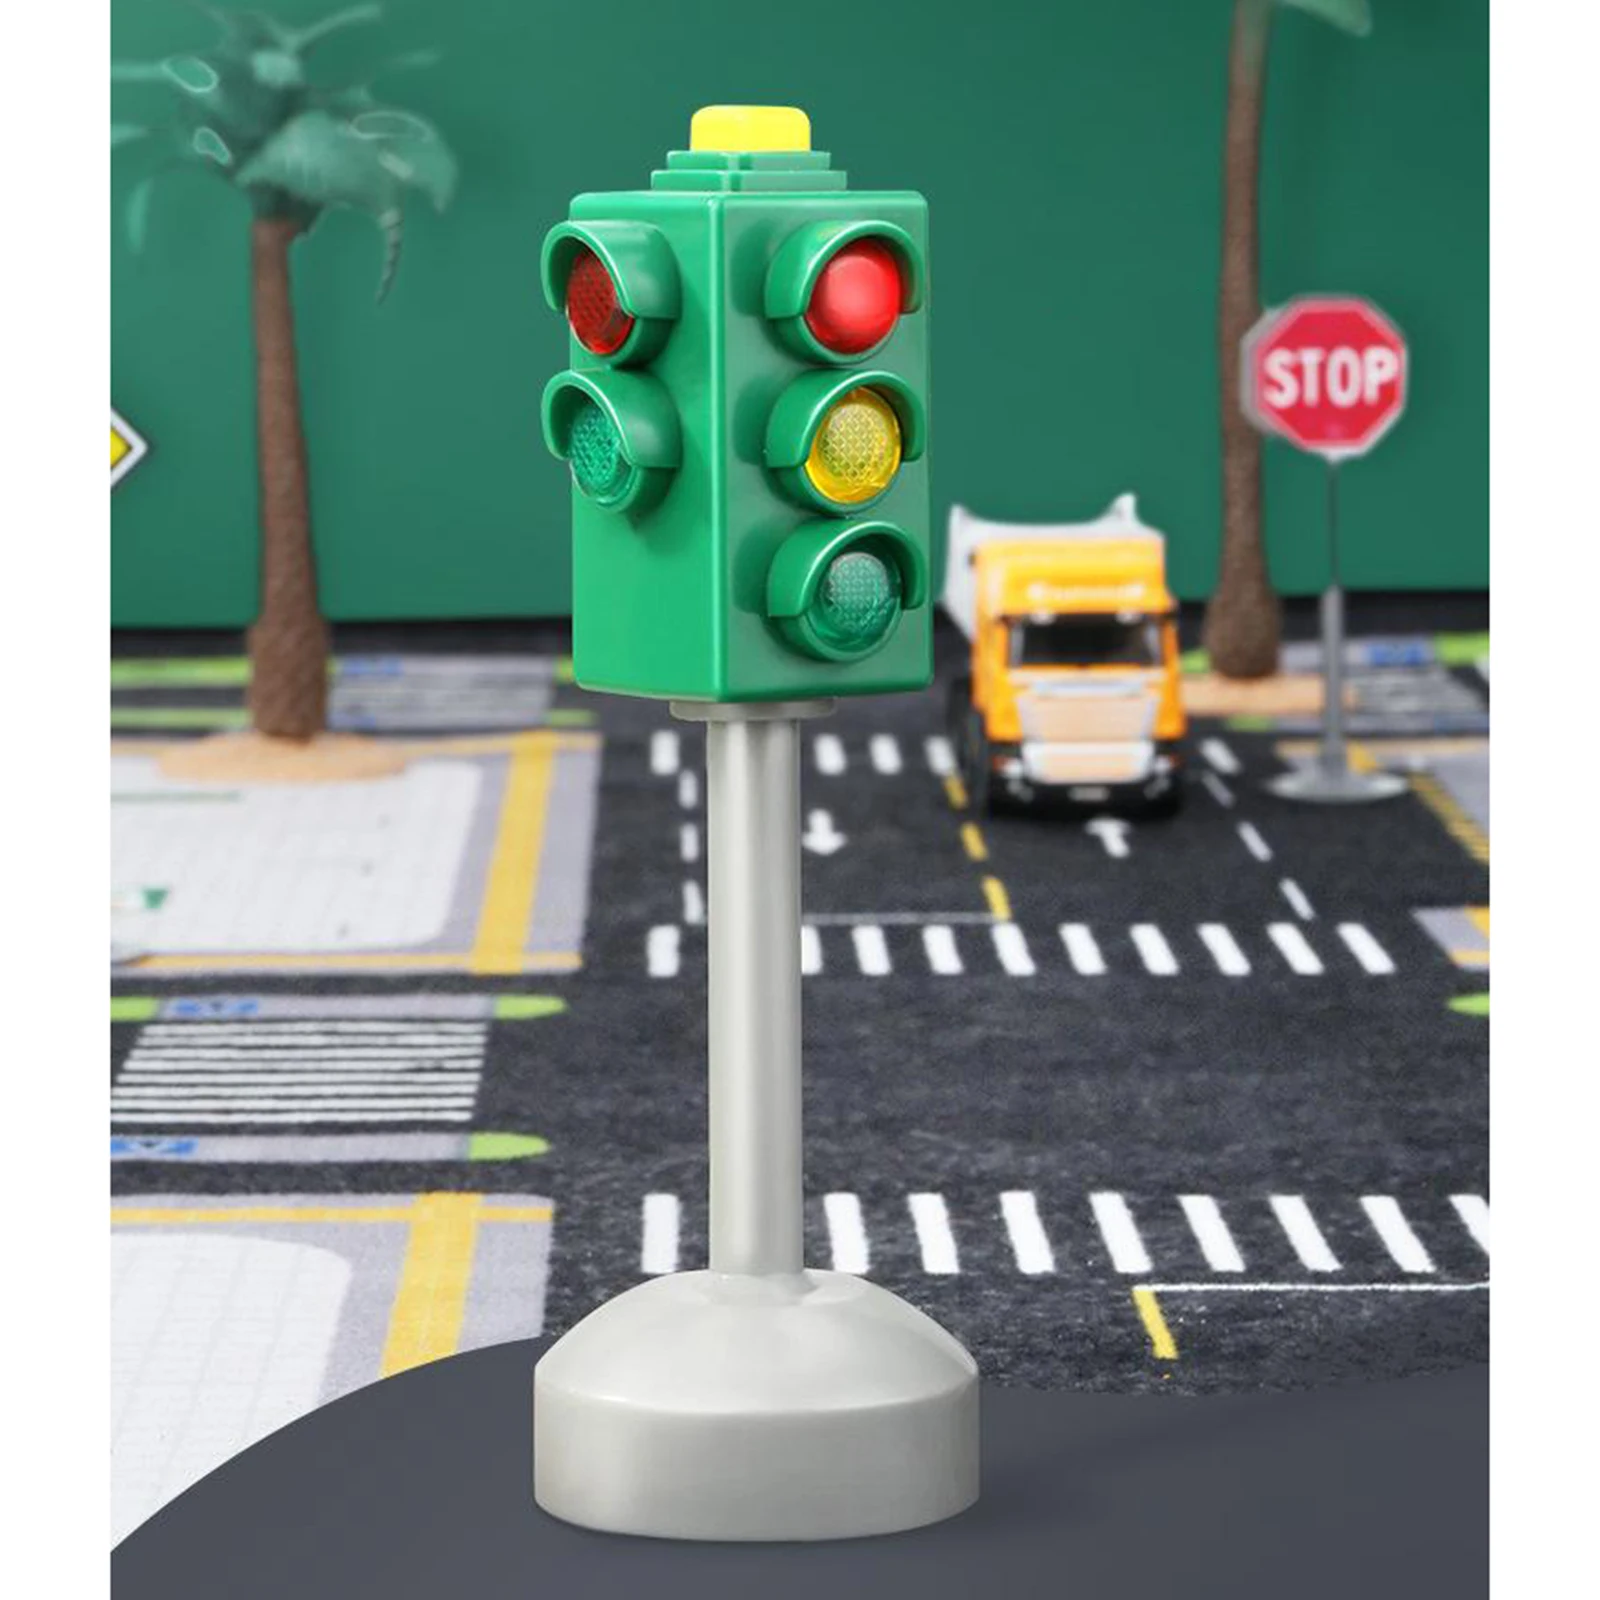 Details about   Simualtion Traffic Light Crosswalk Safety Signs Educational Birthdays Toy 